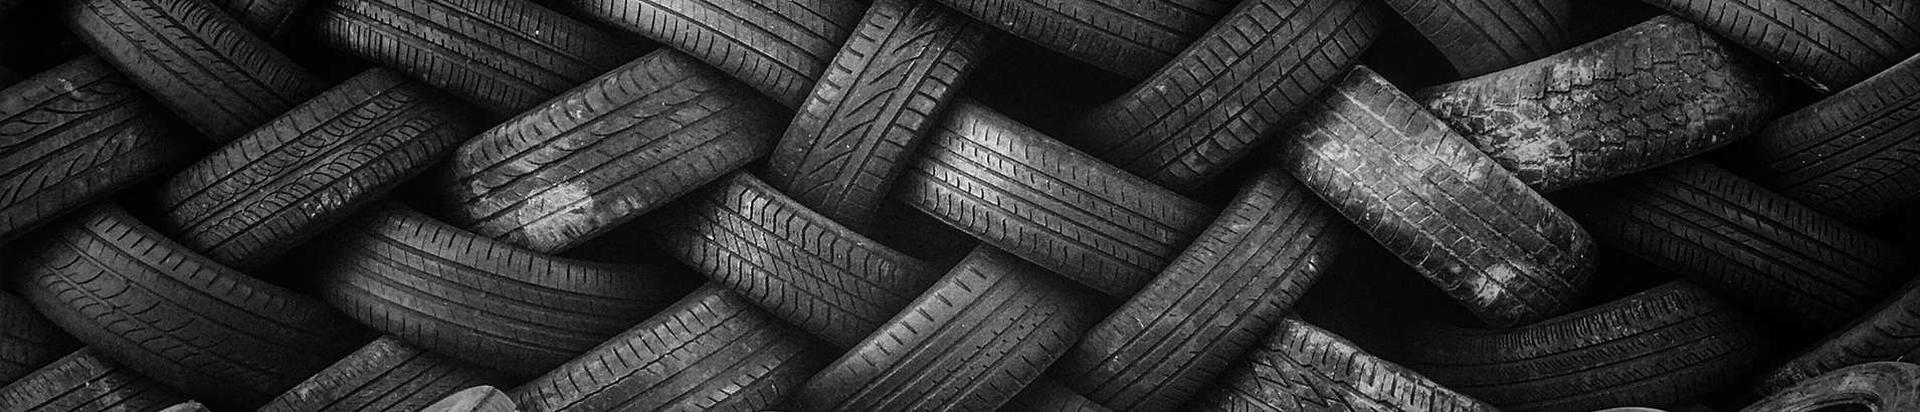 cars and car supplies, car tyres and tyre works, atv-d, Tyres and Tireworks